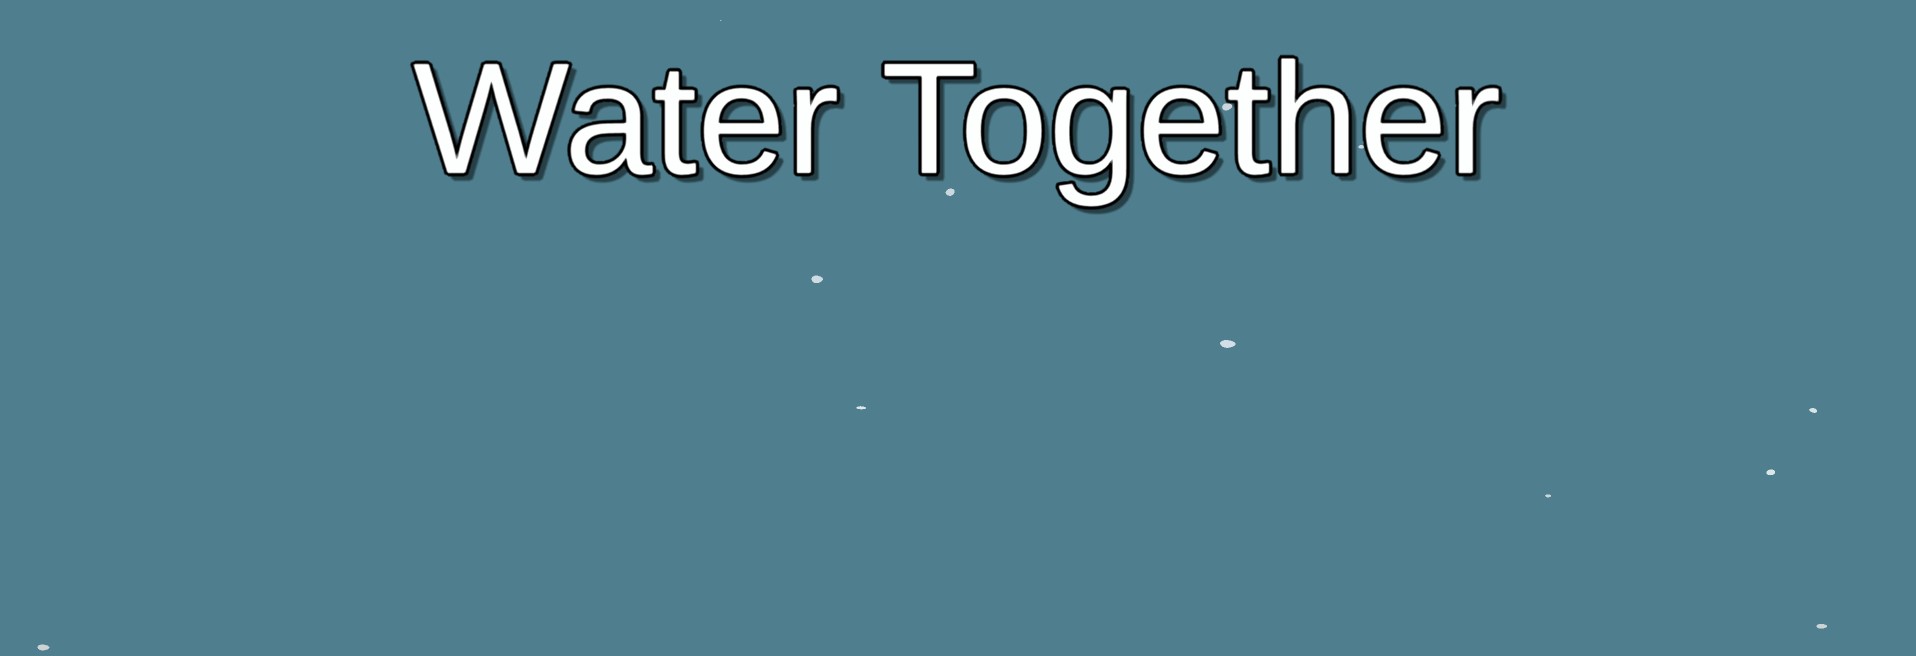 Water Together